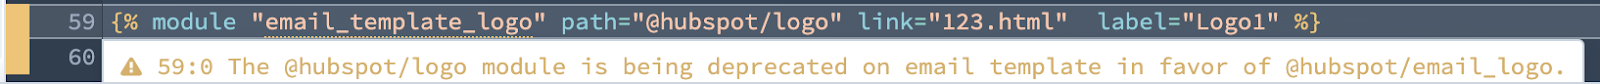 A warning displaying on code  for a module tag in the design manager. The message reads" The @hubspot/logo module is being deprecated on email template in favor of @hubspot/email_logo".